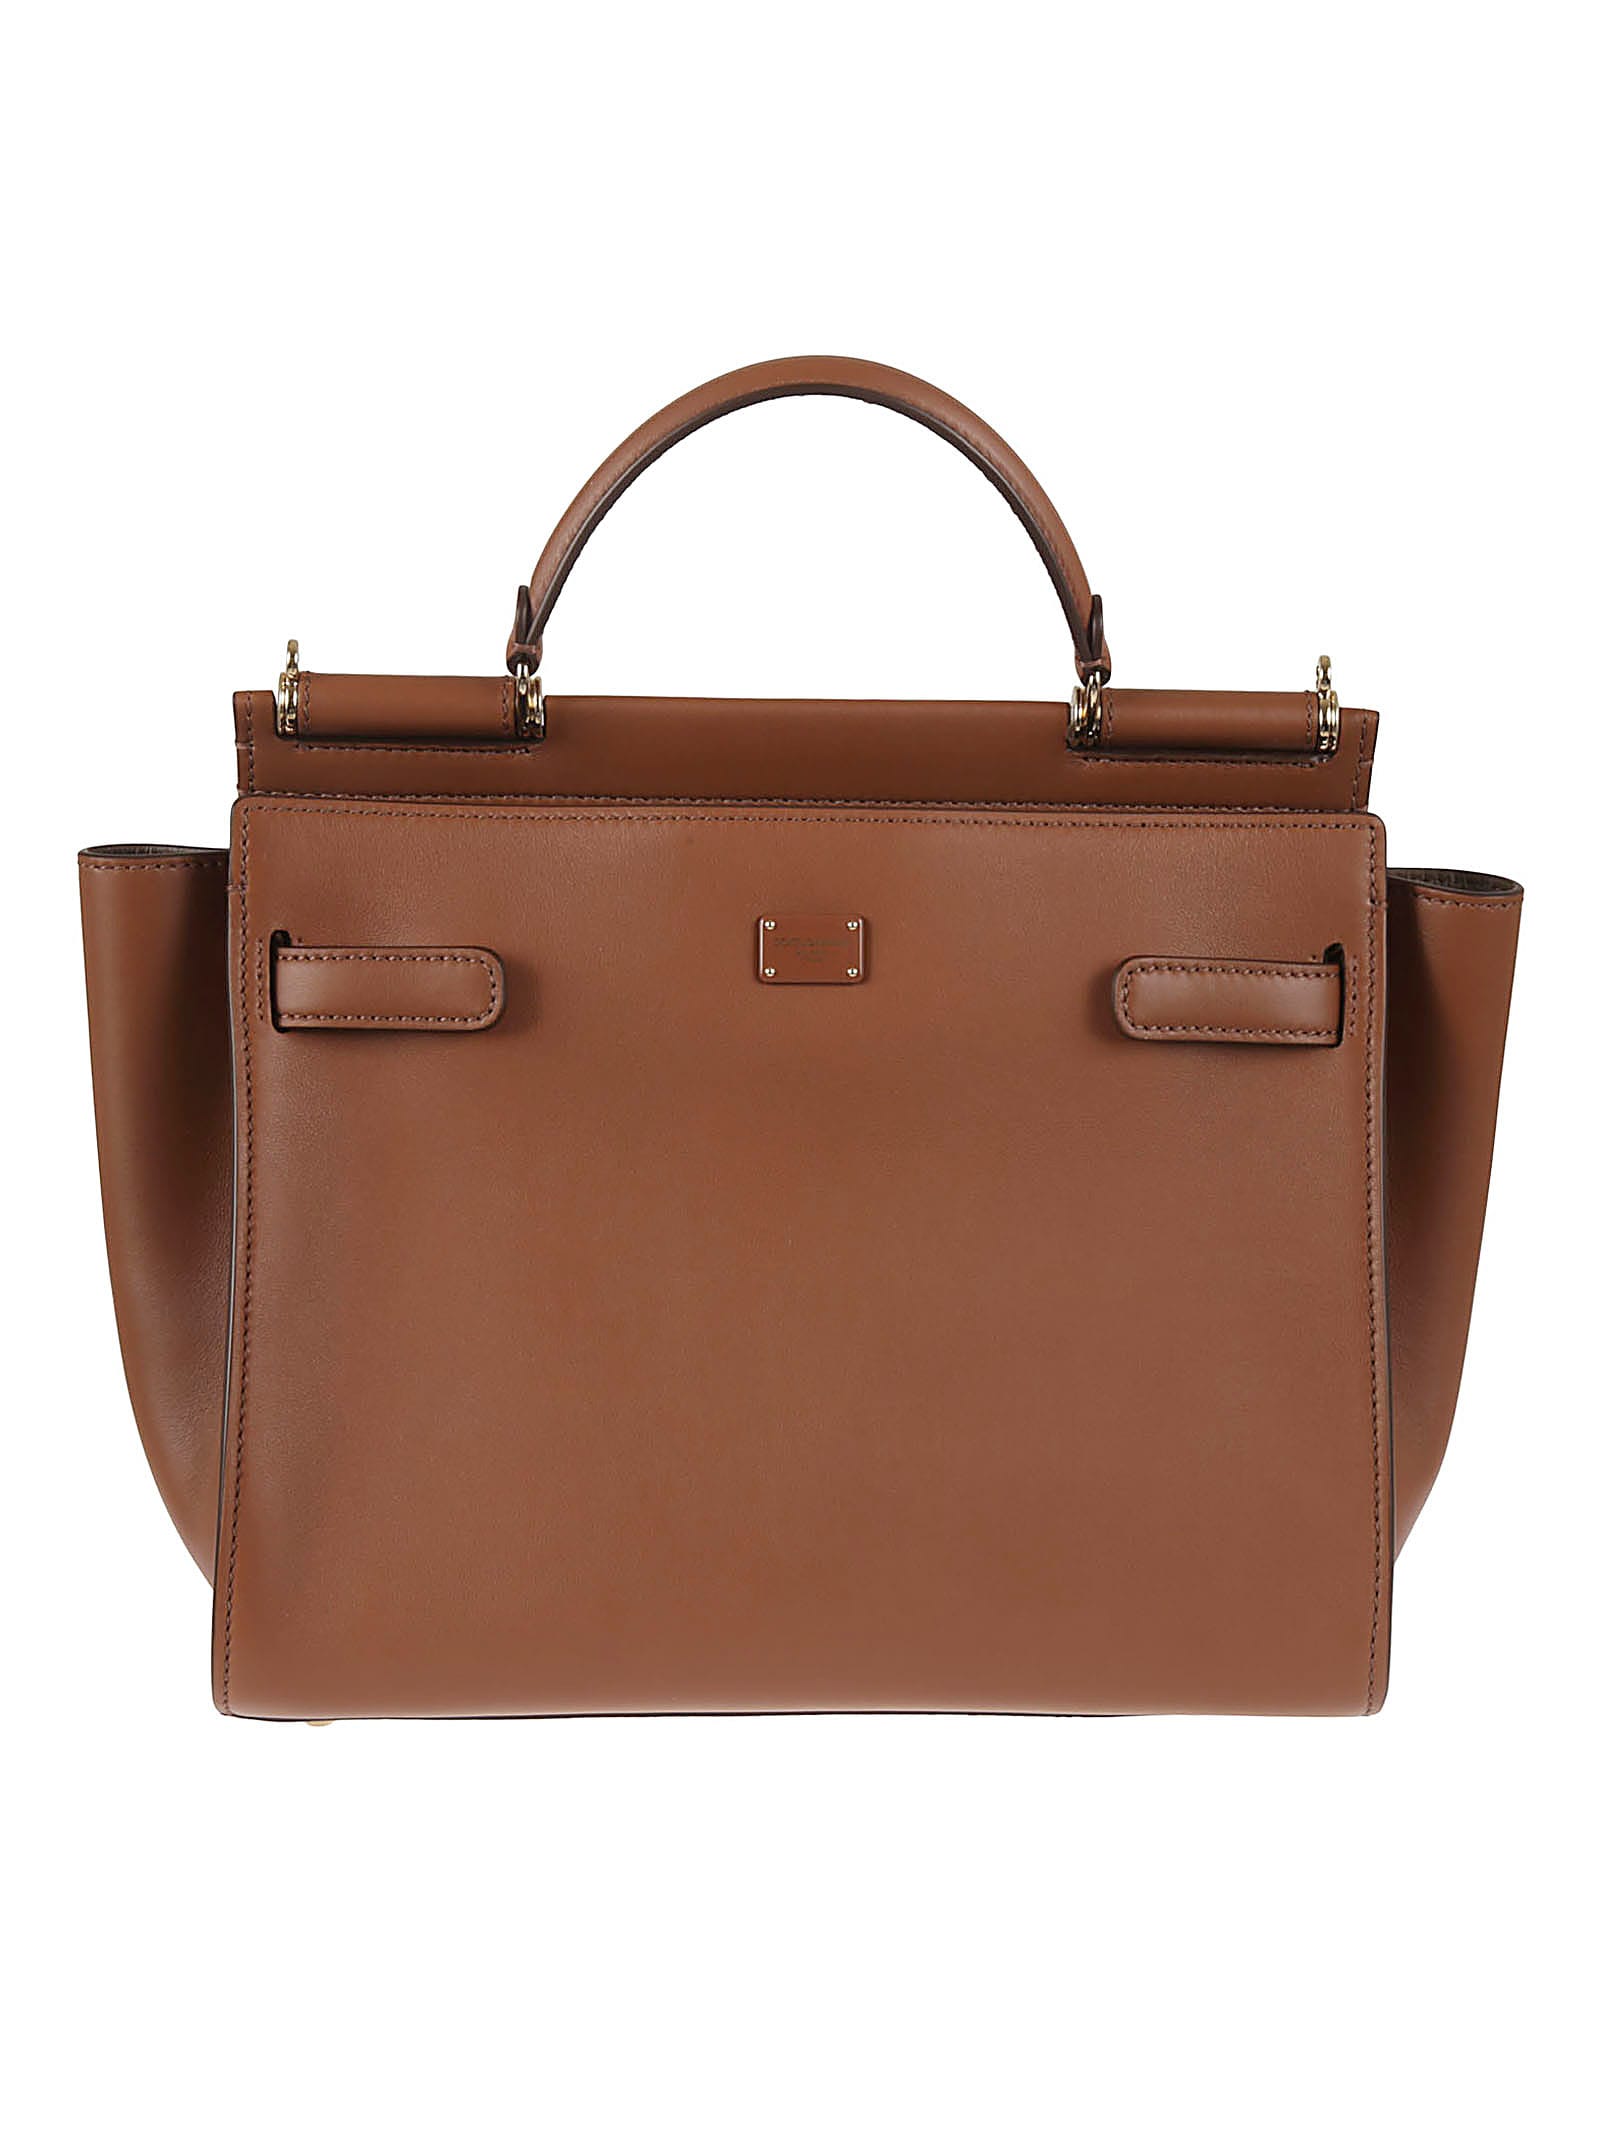 Dolce & Gabbana Logo Plaque Tote In Brown